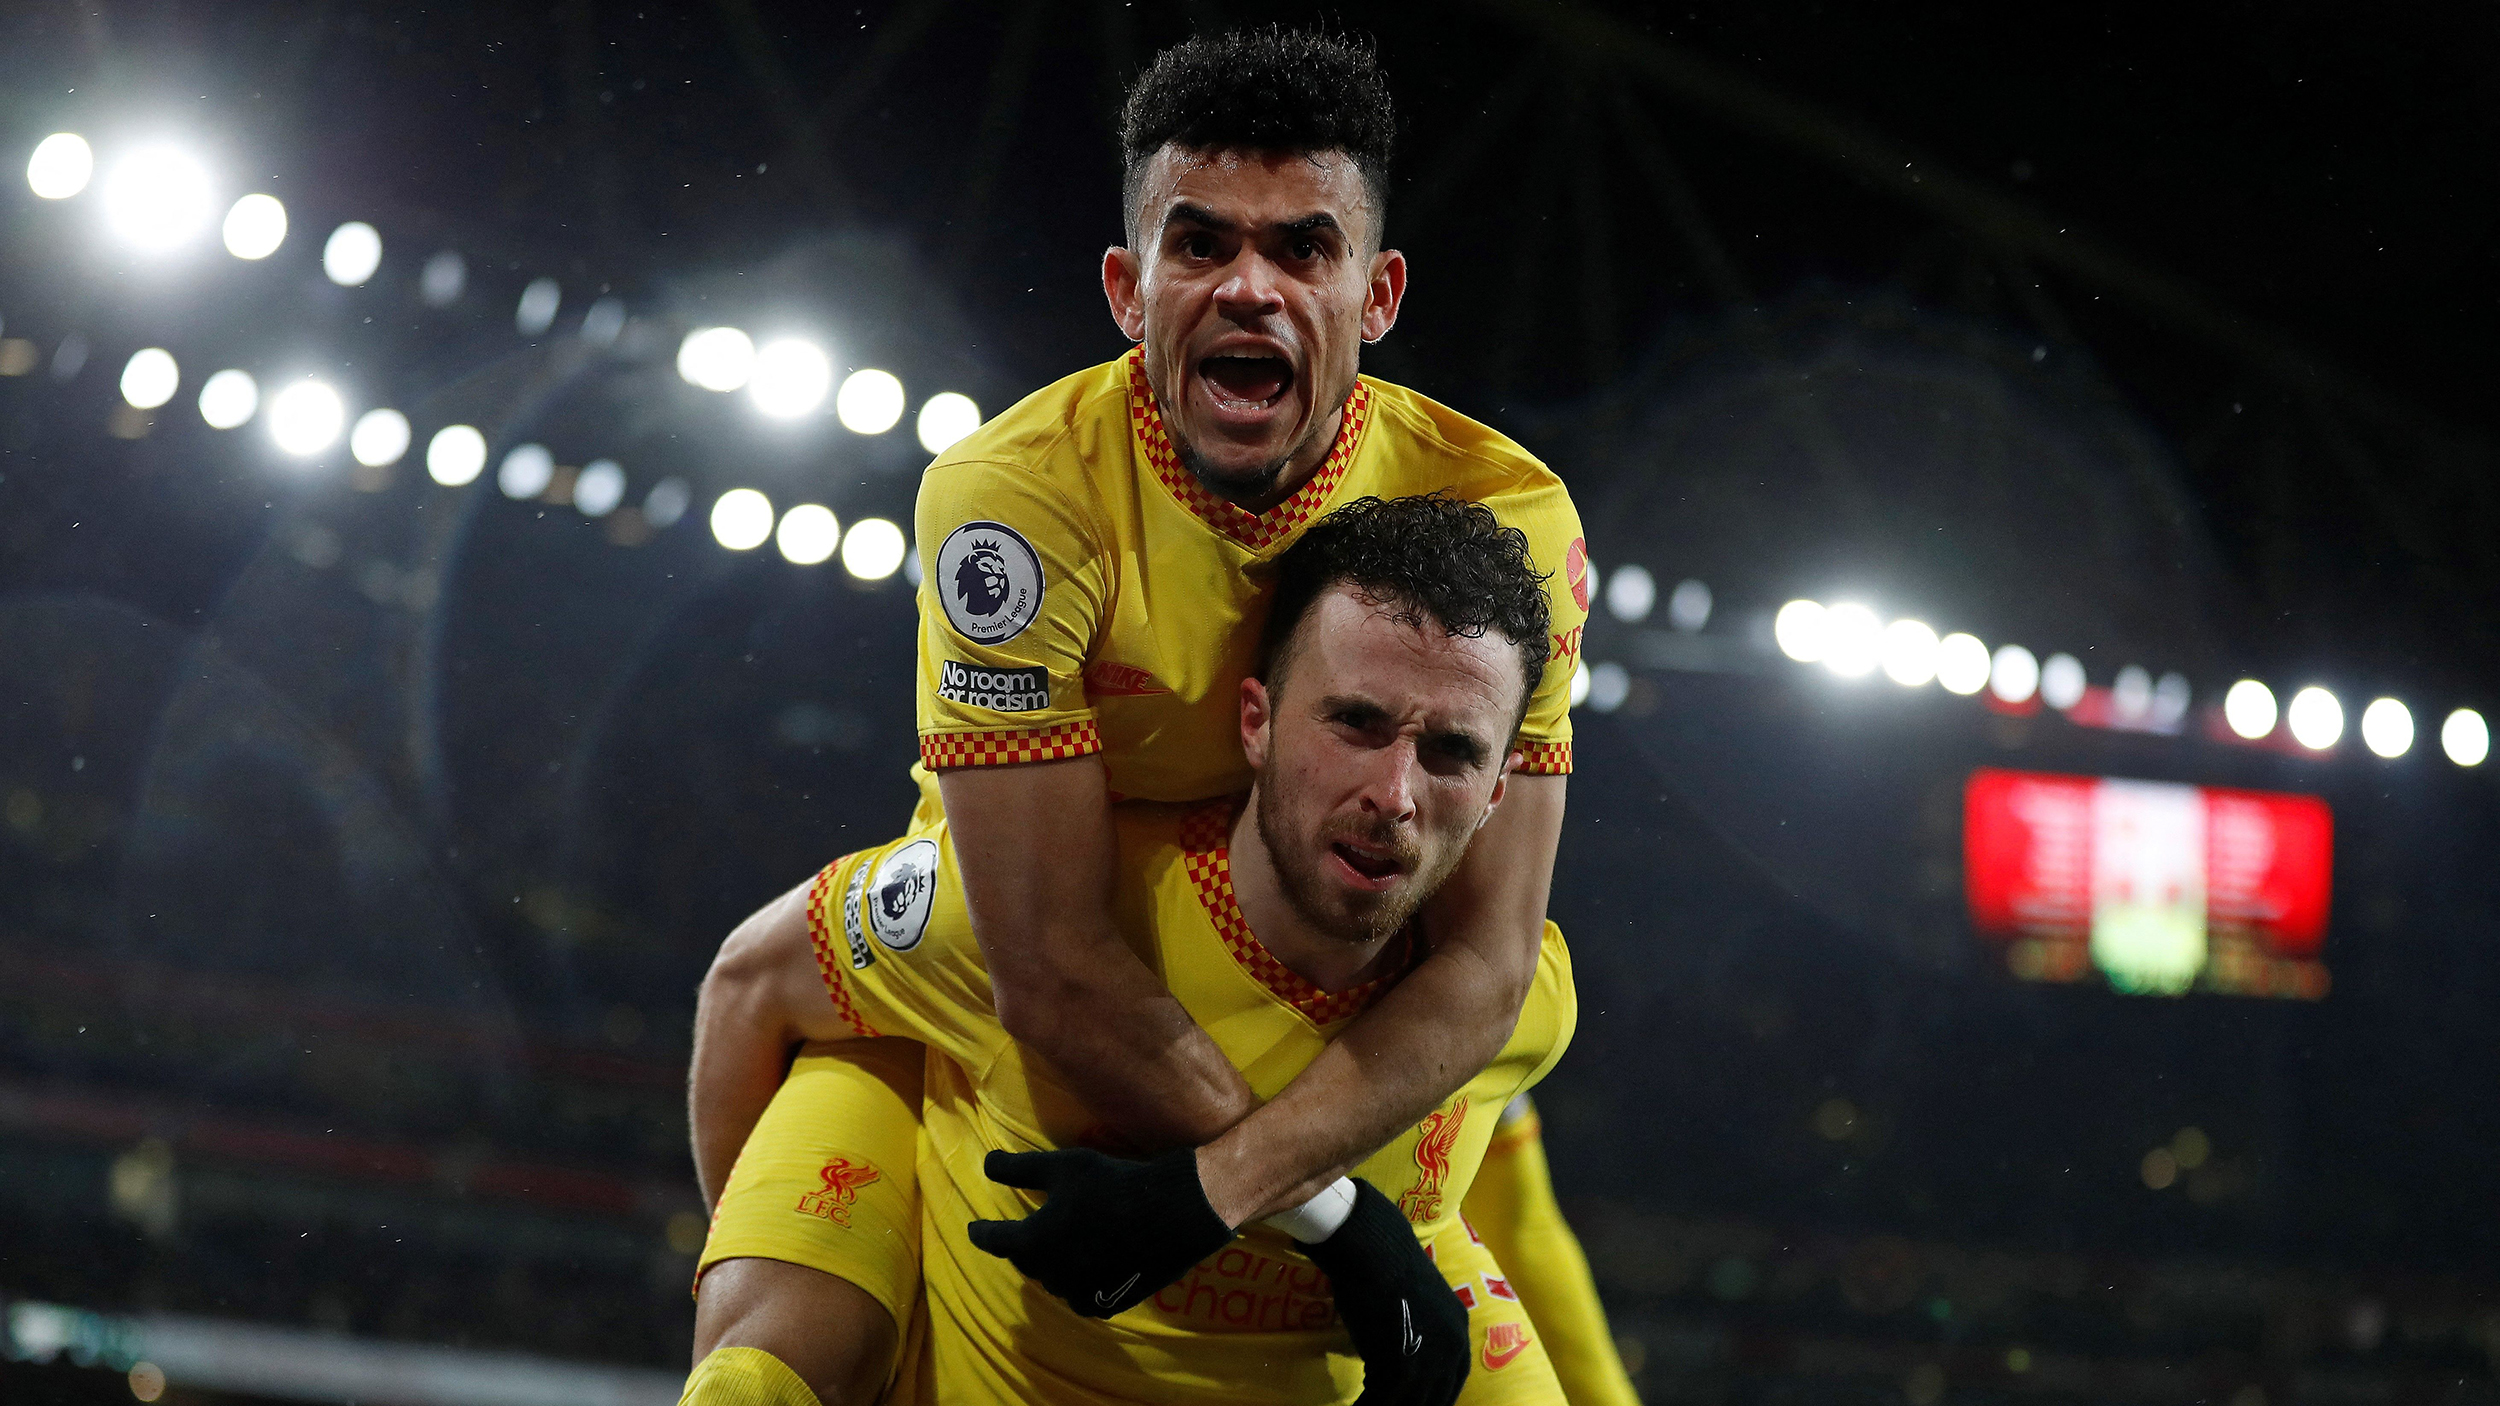 Liverpool's Portuguese striker Diogo Jota celebrates scoring the opening goal with Liverpool's Colombian midfielder Luis Diaz during the English Premier League football match between Arsenal and Liverpool at the Emirates Stadium in London on March 16, 2022.